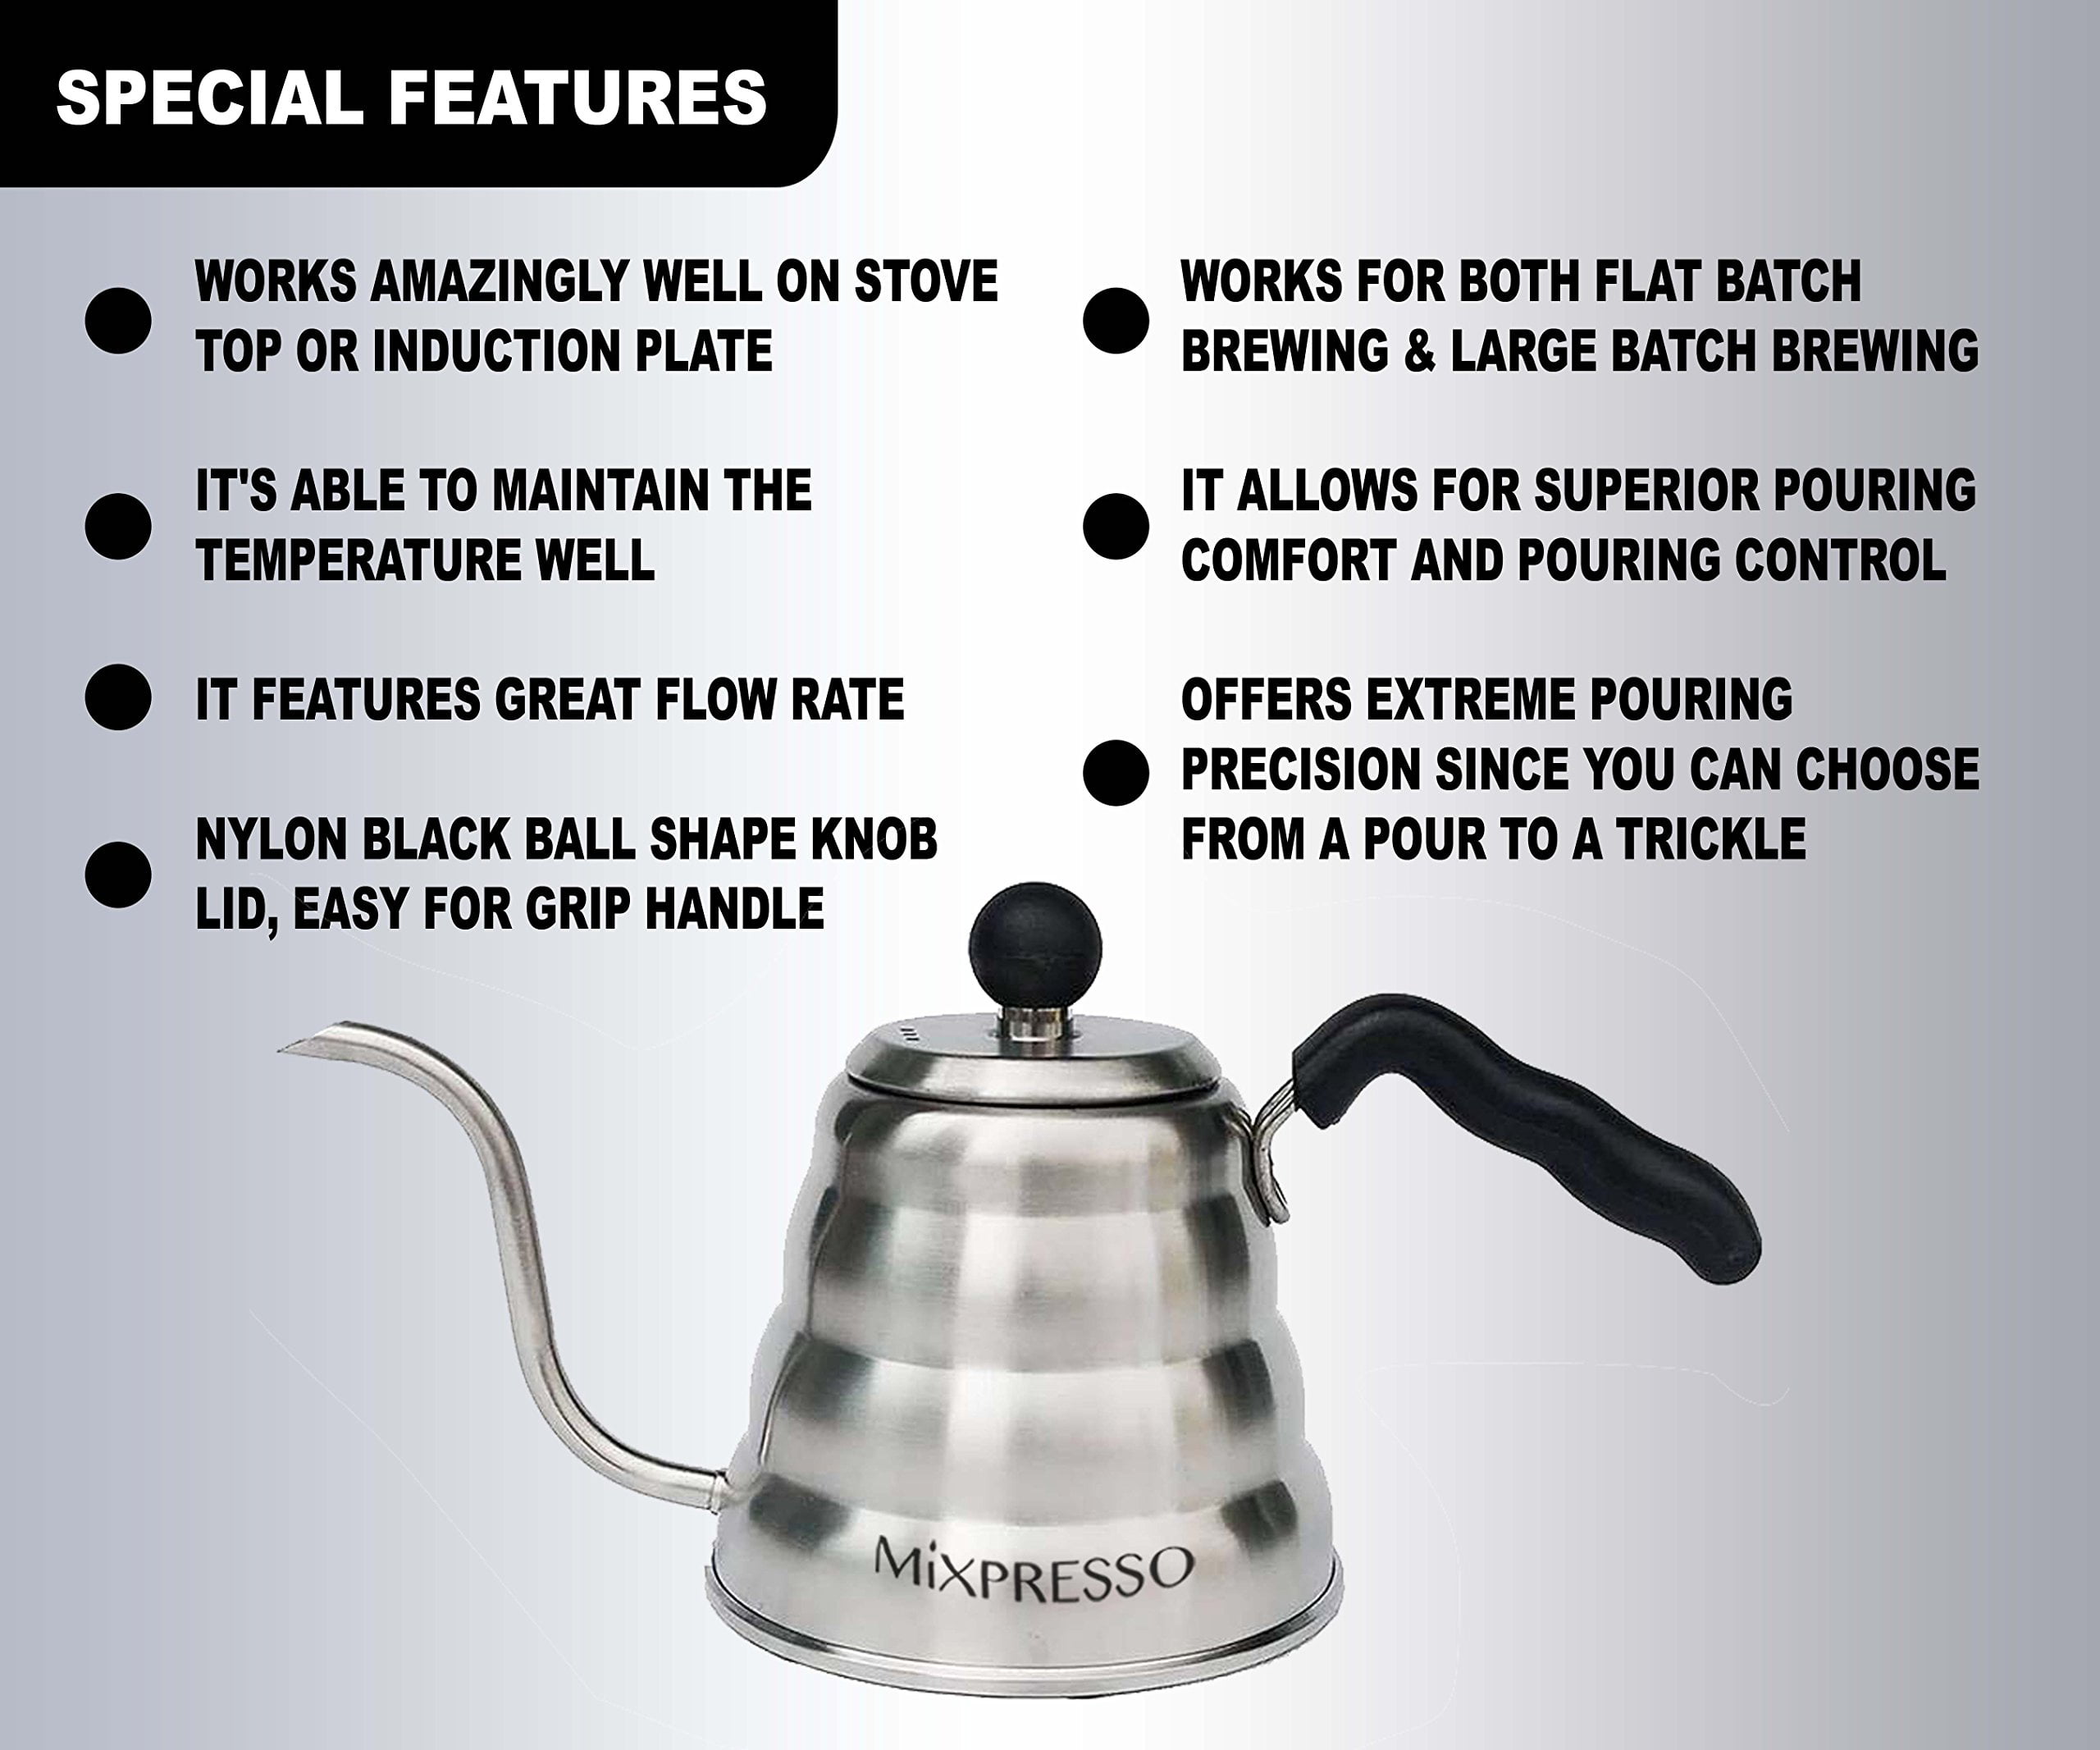 Restpresso 12 oz Black Stainless Steel Pour Over / Gooseneck Kettle - 7 x  3 1/4 x 4 - 1 count box